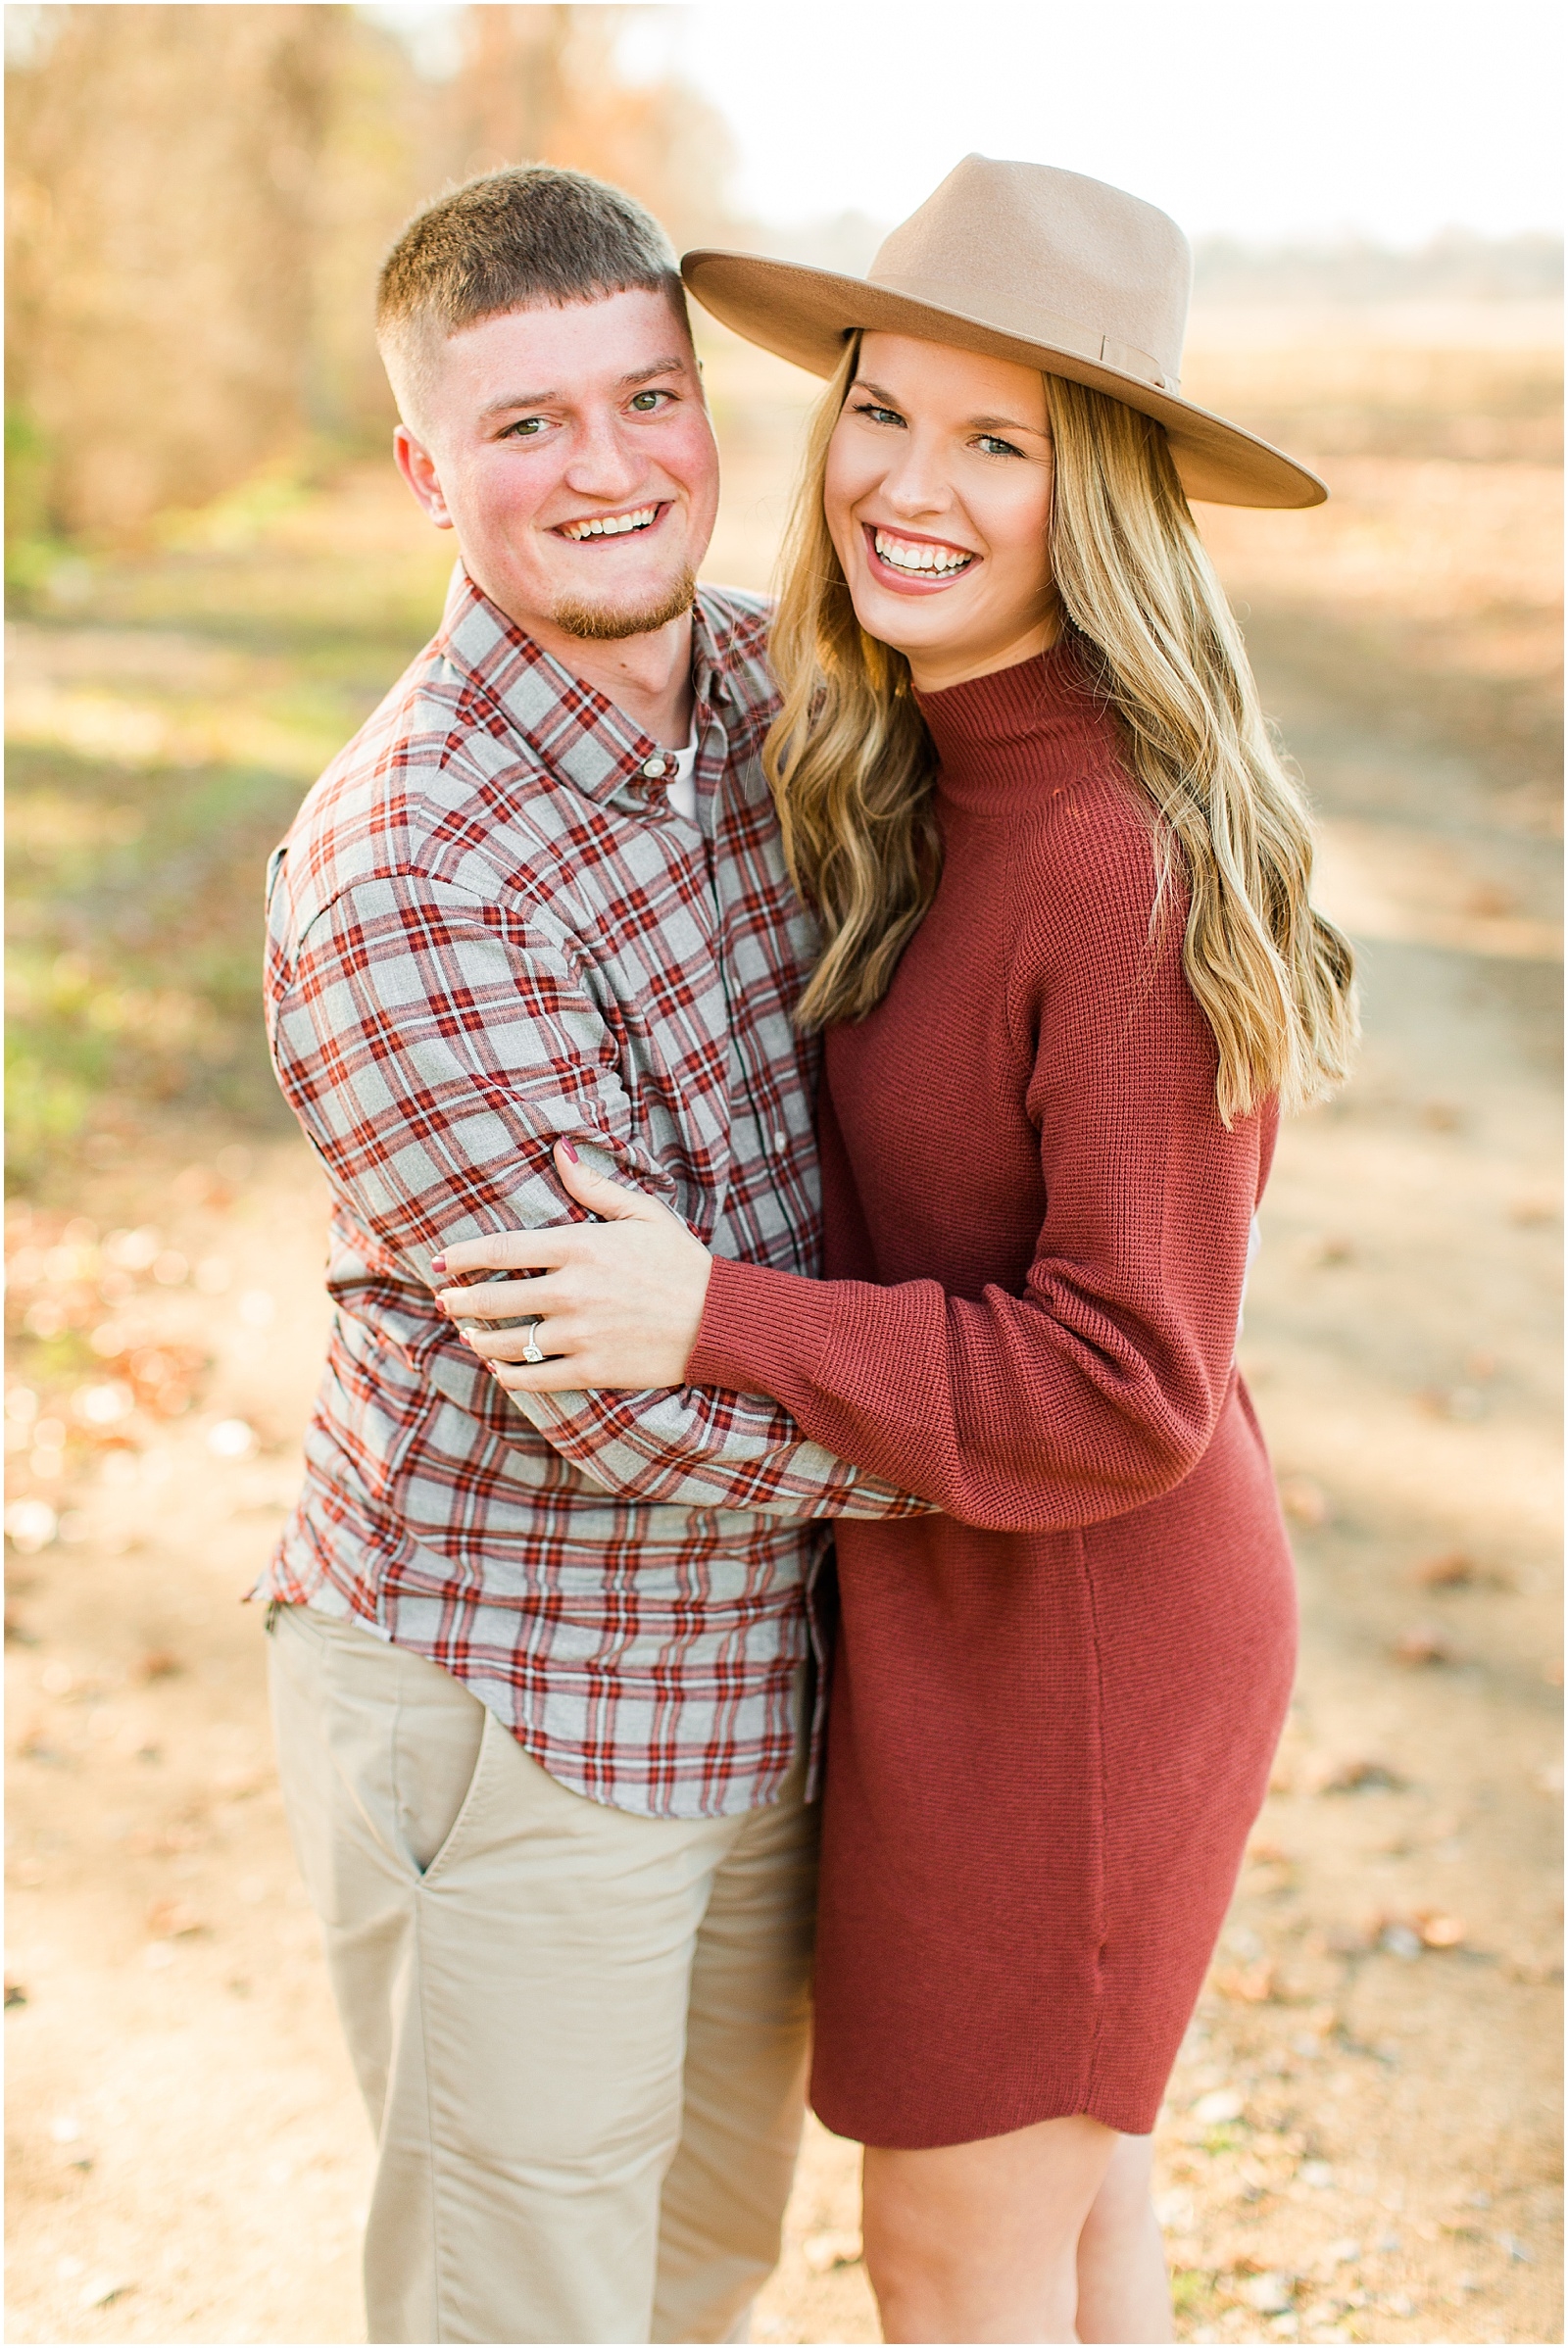 A Fall Southern Indiana Engagement Seesion | Cody and Hannah | Bret and Brandie Photography 013.jpg